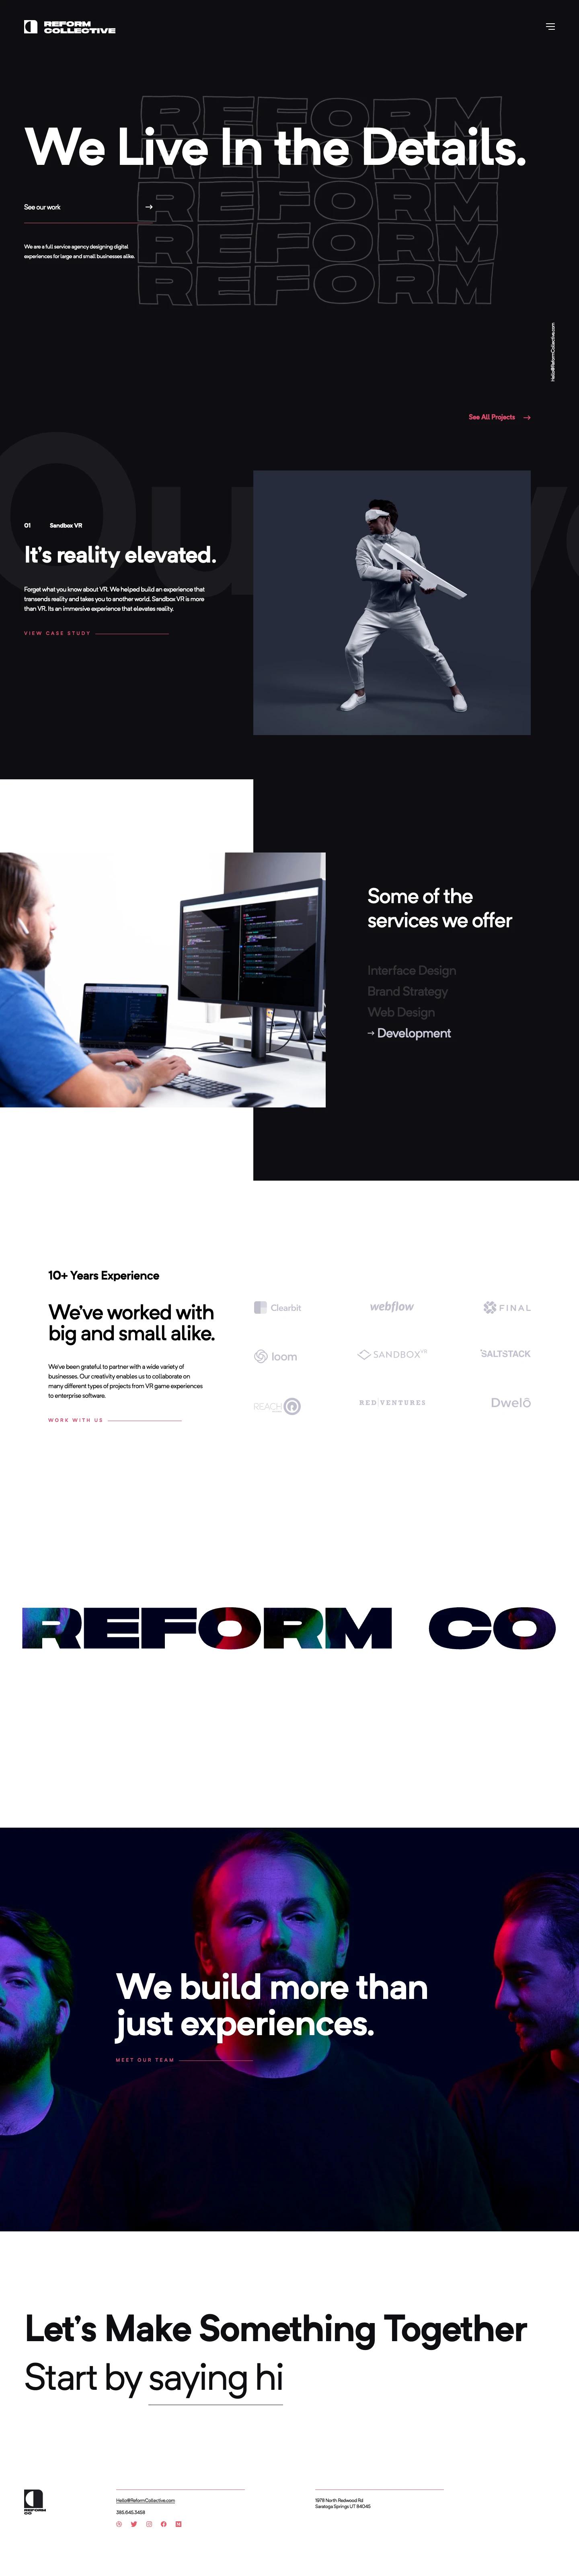 Reform Collective Landing Page Example: We are a full service agency based in the Salt Lake City area, designing digital experiences for large and small businesses alike.